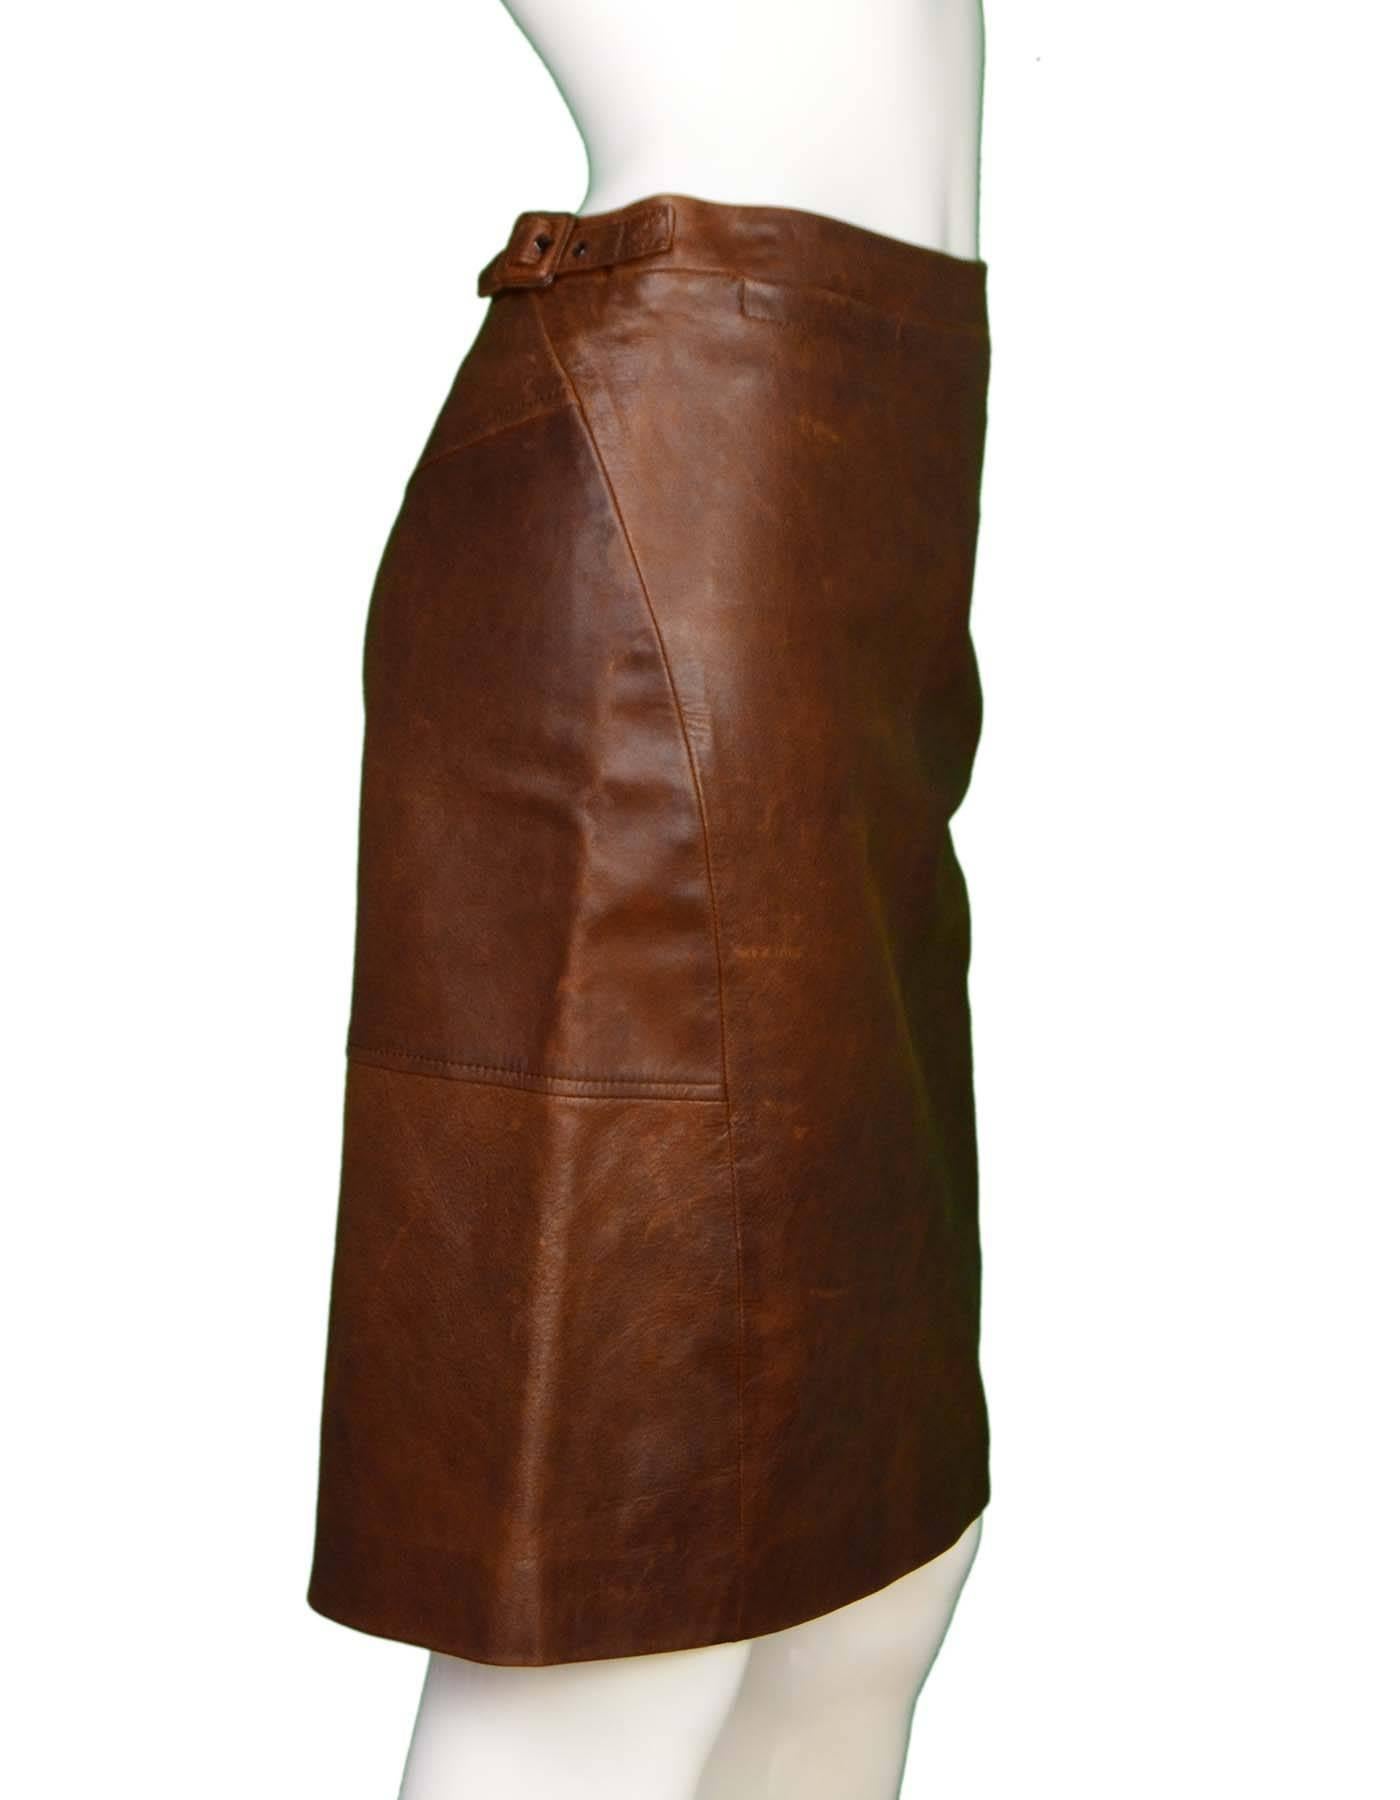 MaxMara Brown Leather Skirt Sz 4
Features buckle details at sides

Made In: Italy
Color: Brown
Composition: 100% Leather
Lining: Brown textile
Closure/Opening: Hidden back zip closure
Overall Condition: Very goof pre-owned condition - gentle